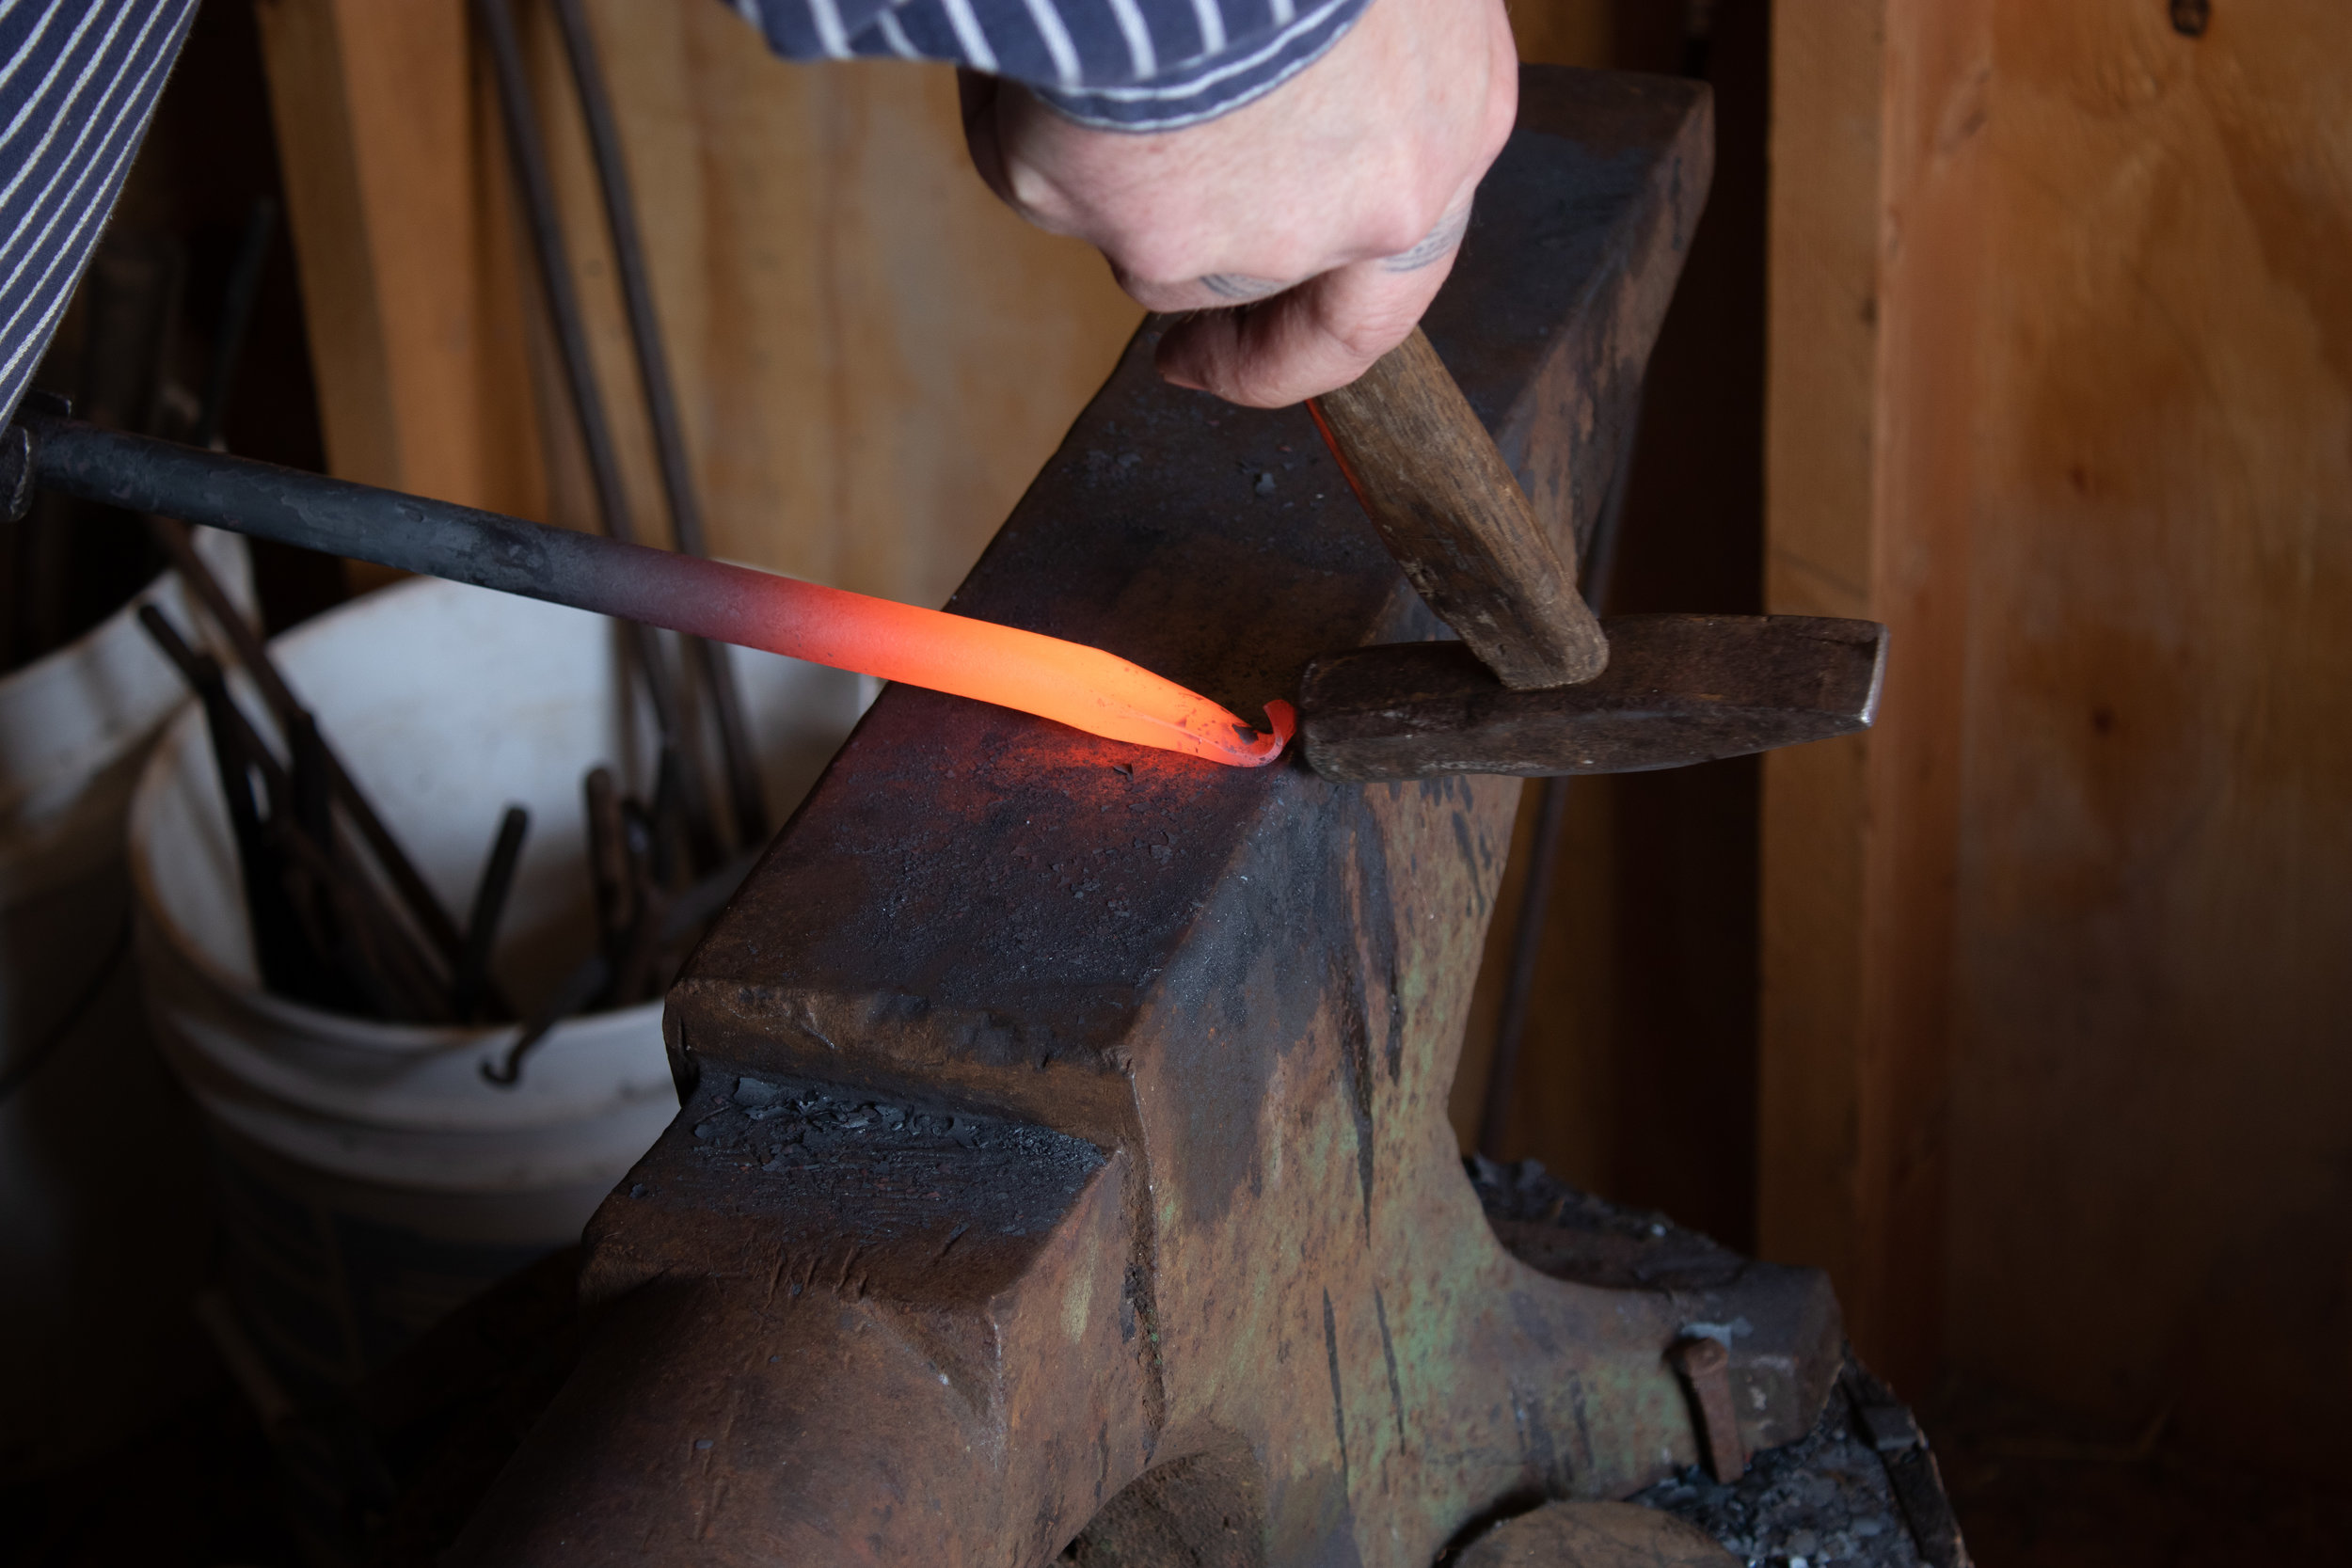 Easy blacksmith project - boot hook with a wooden handle turned on the  lathe 